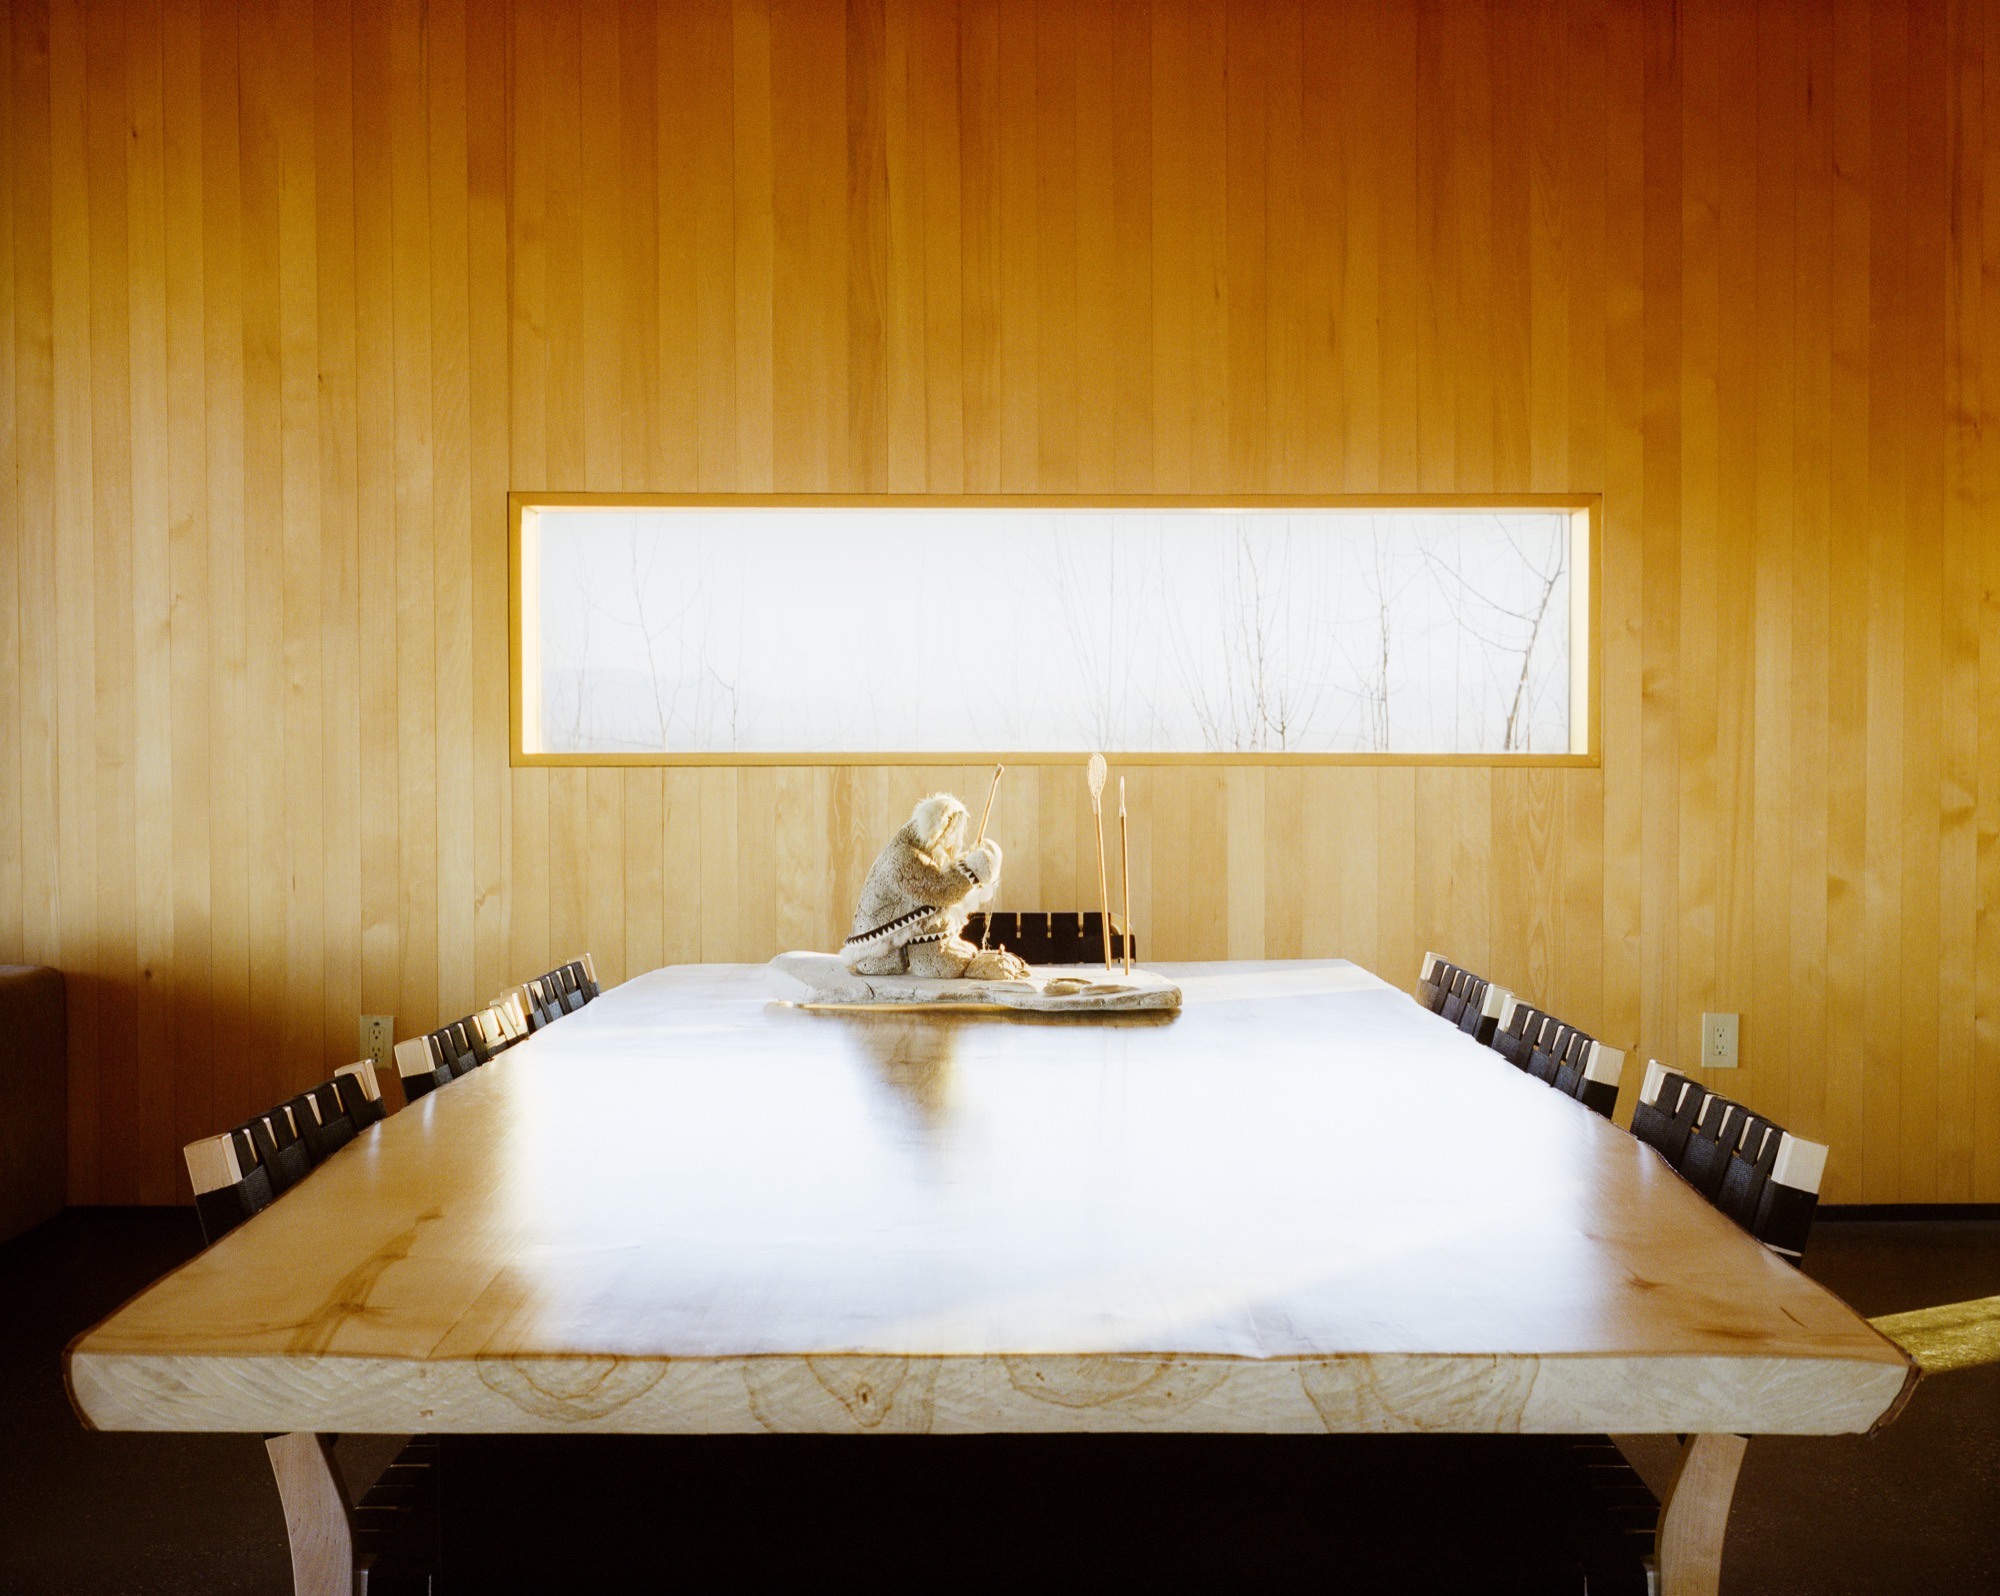 Buser made the dining table which is surrounded by Chair 611s by Alvar Aalto for Artek / Photo by Kamil Bialous